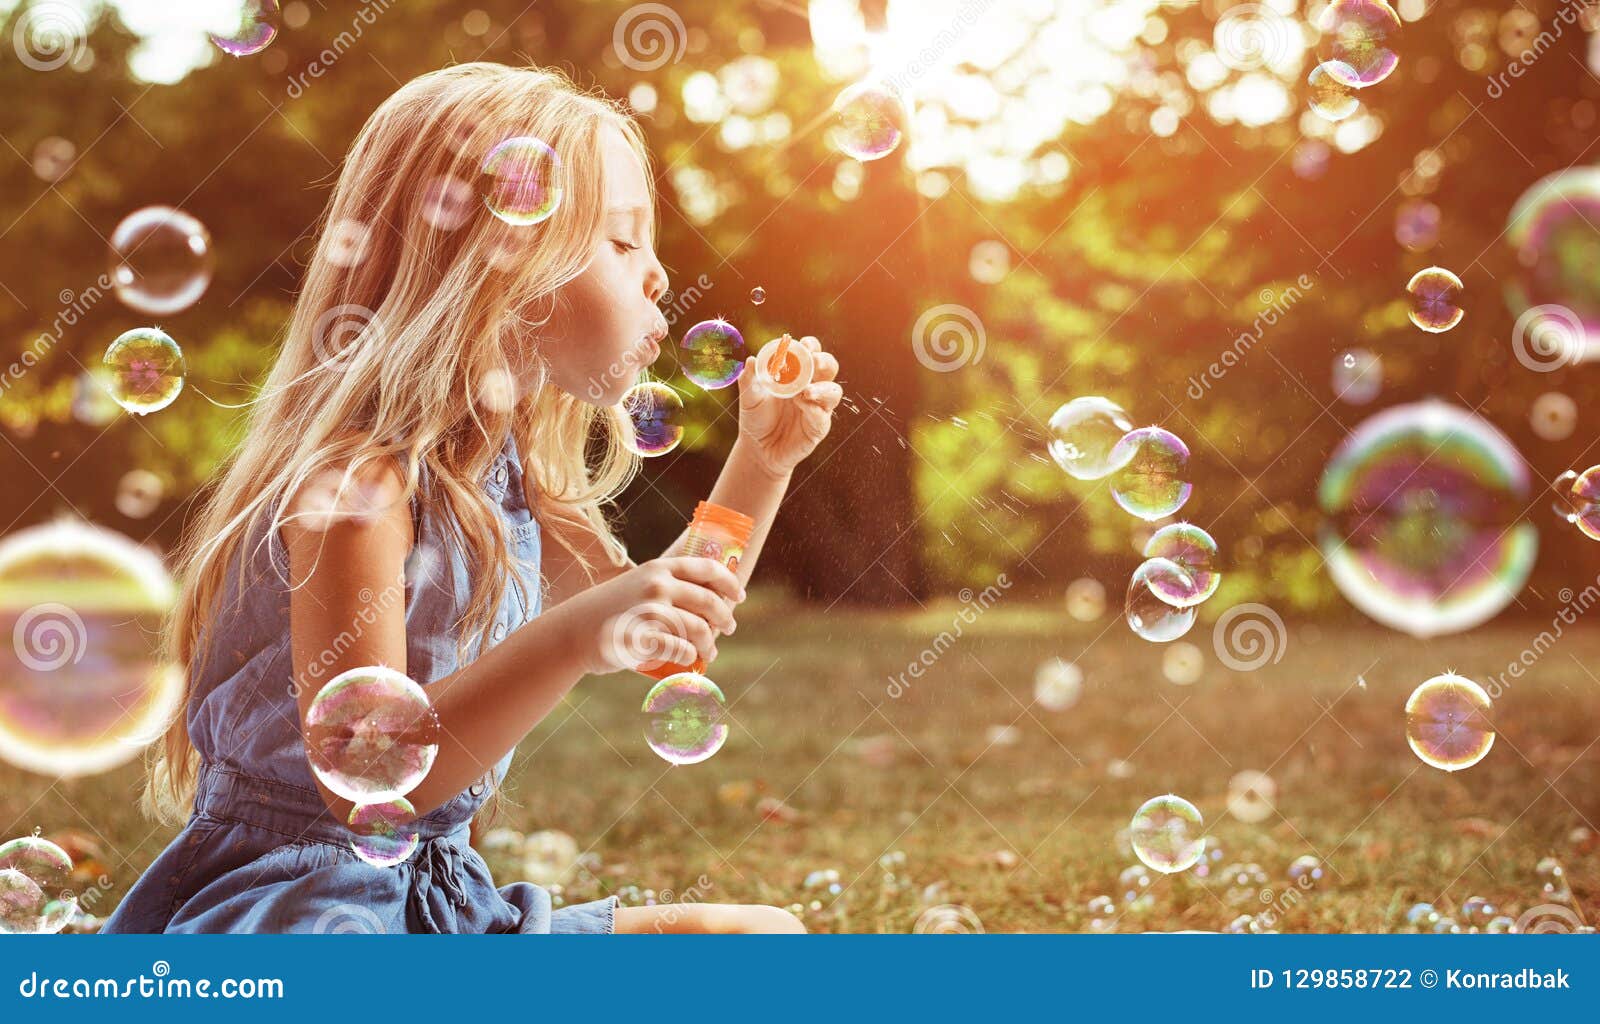 portrait of a cheerful girl blowing soap bubbles